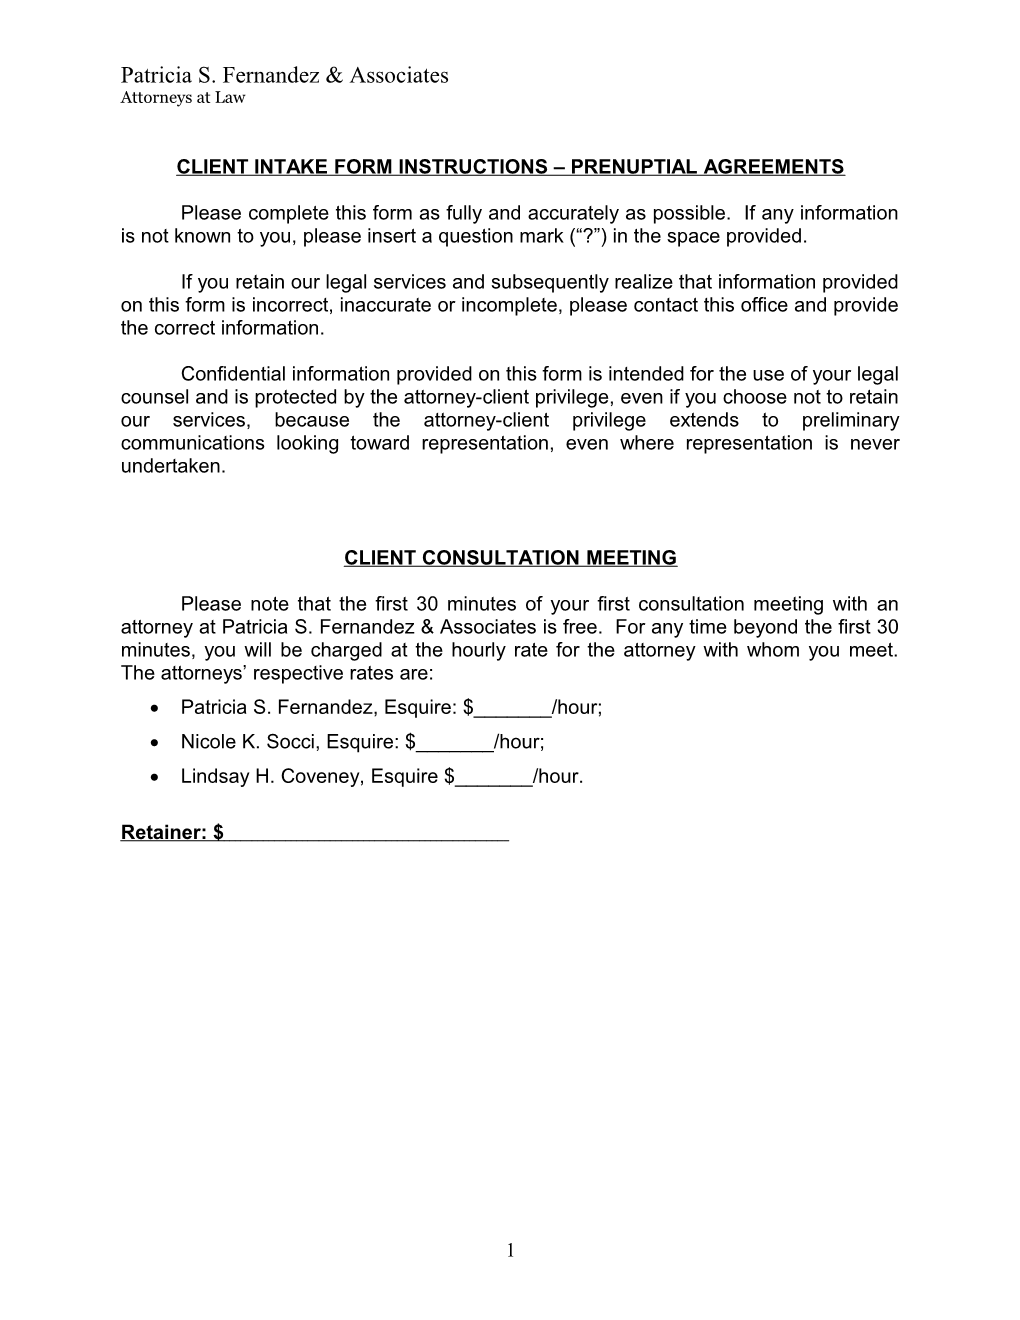 Client Intake Form Instructions Prenuptial Agreements